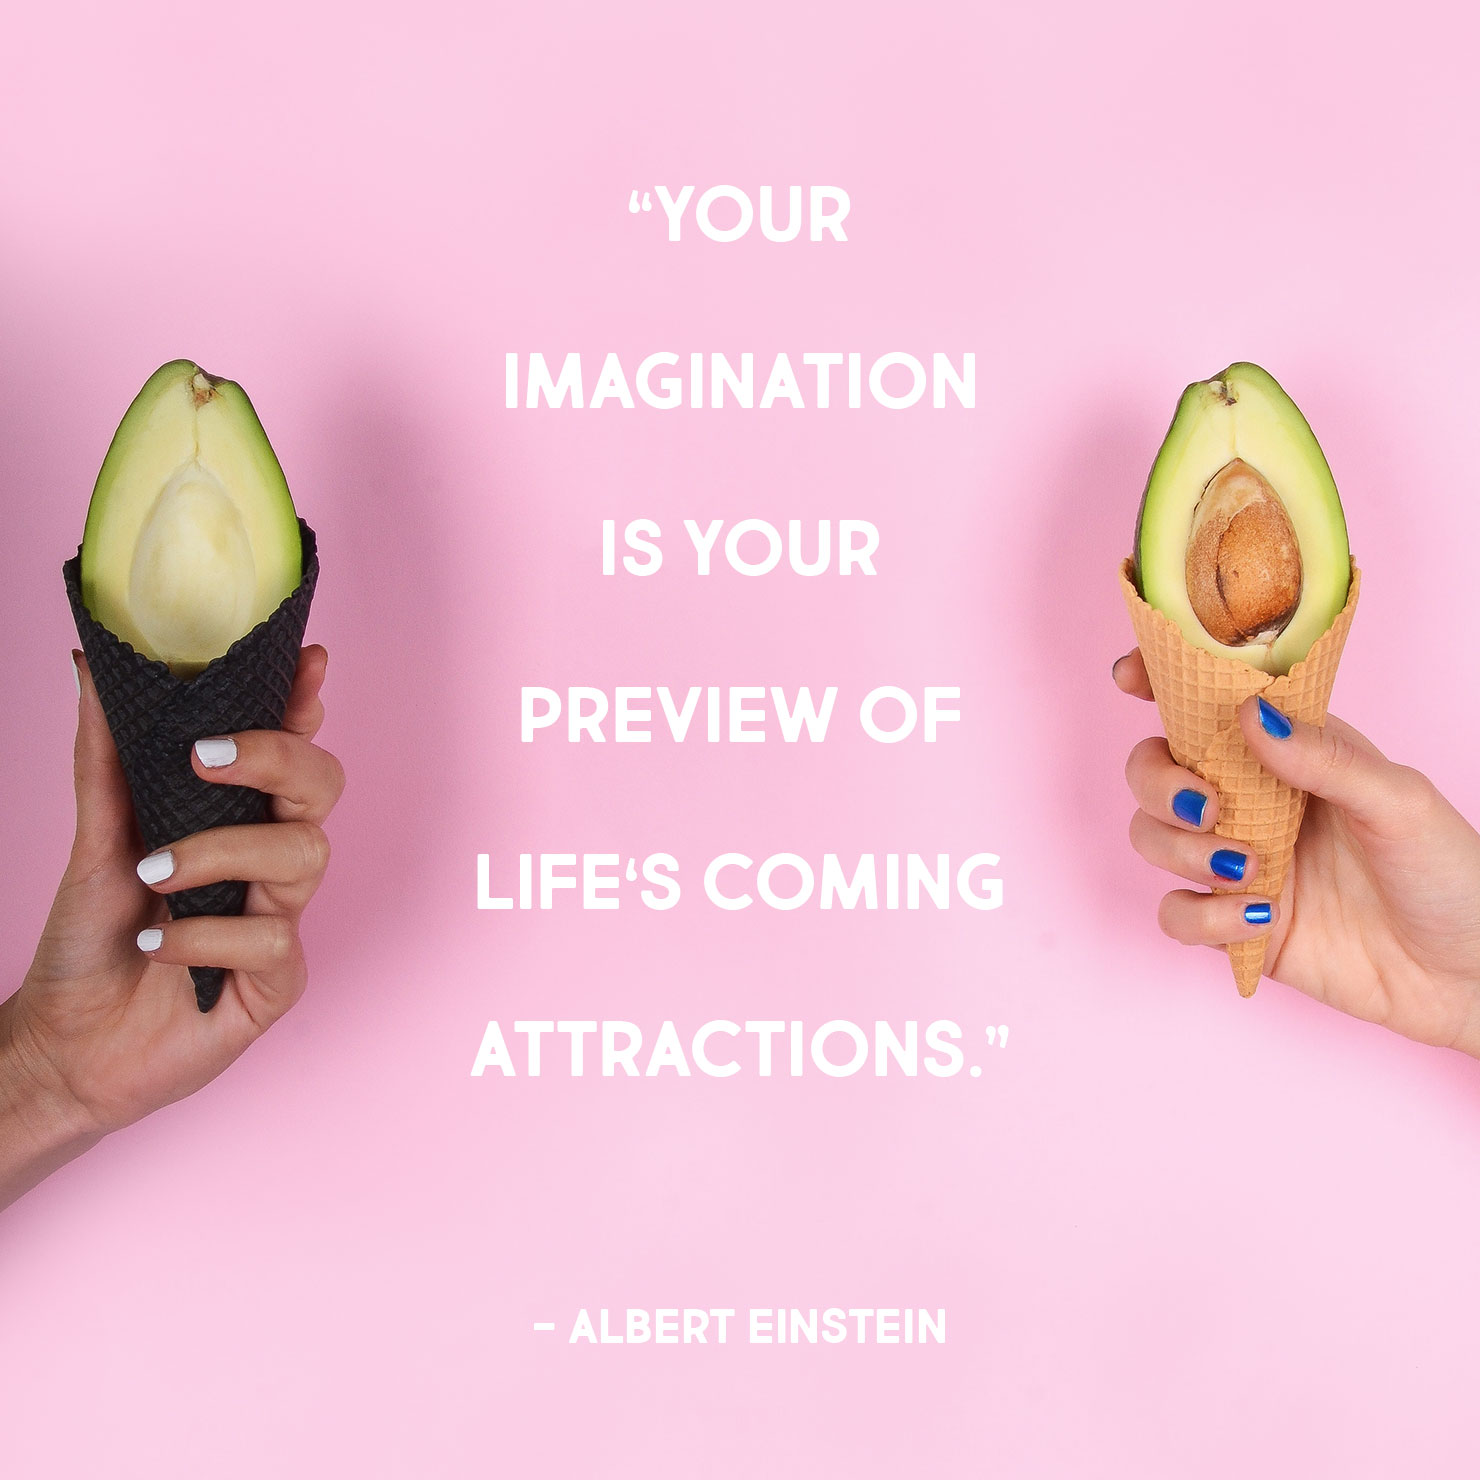 100+ Graduation Quotes and Sayings 2019 | Shutterfly